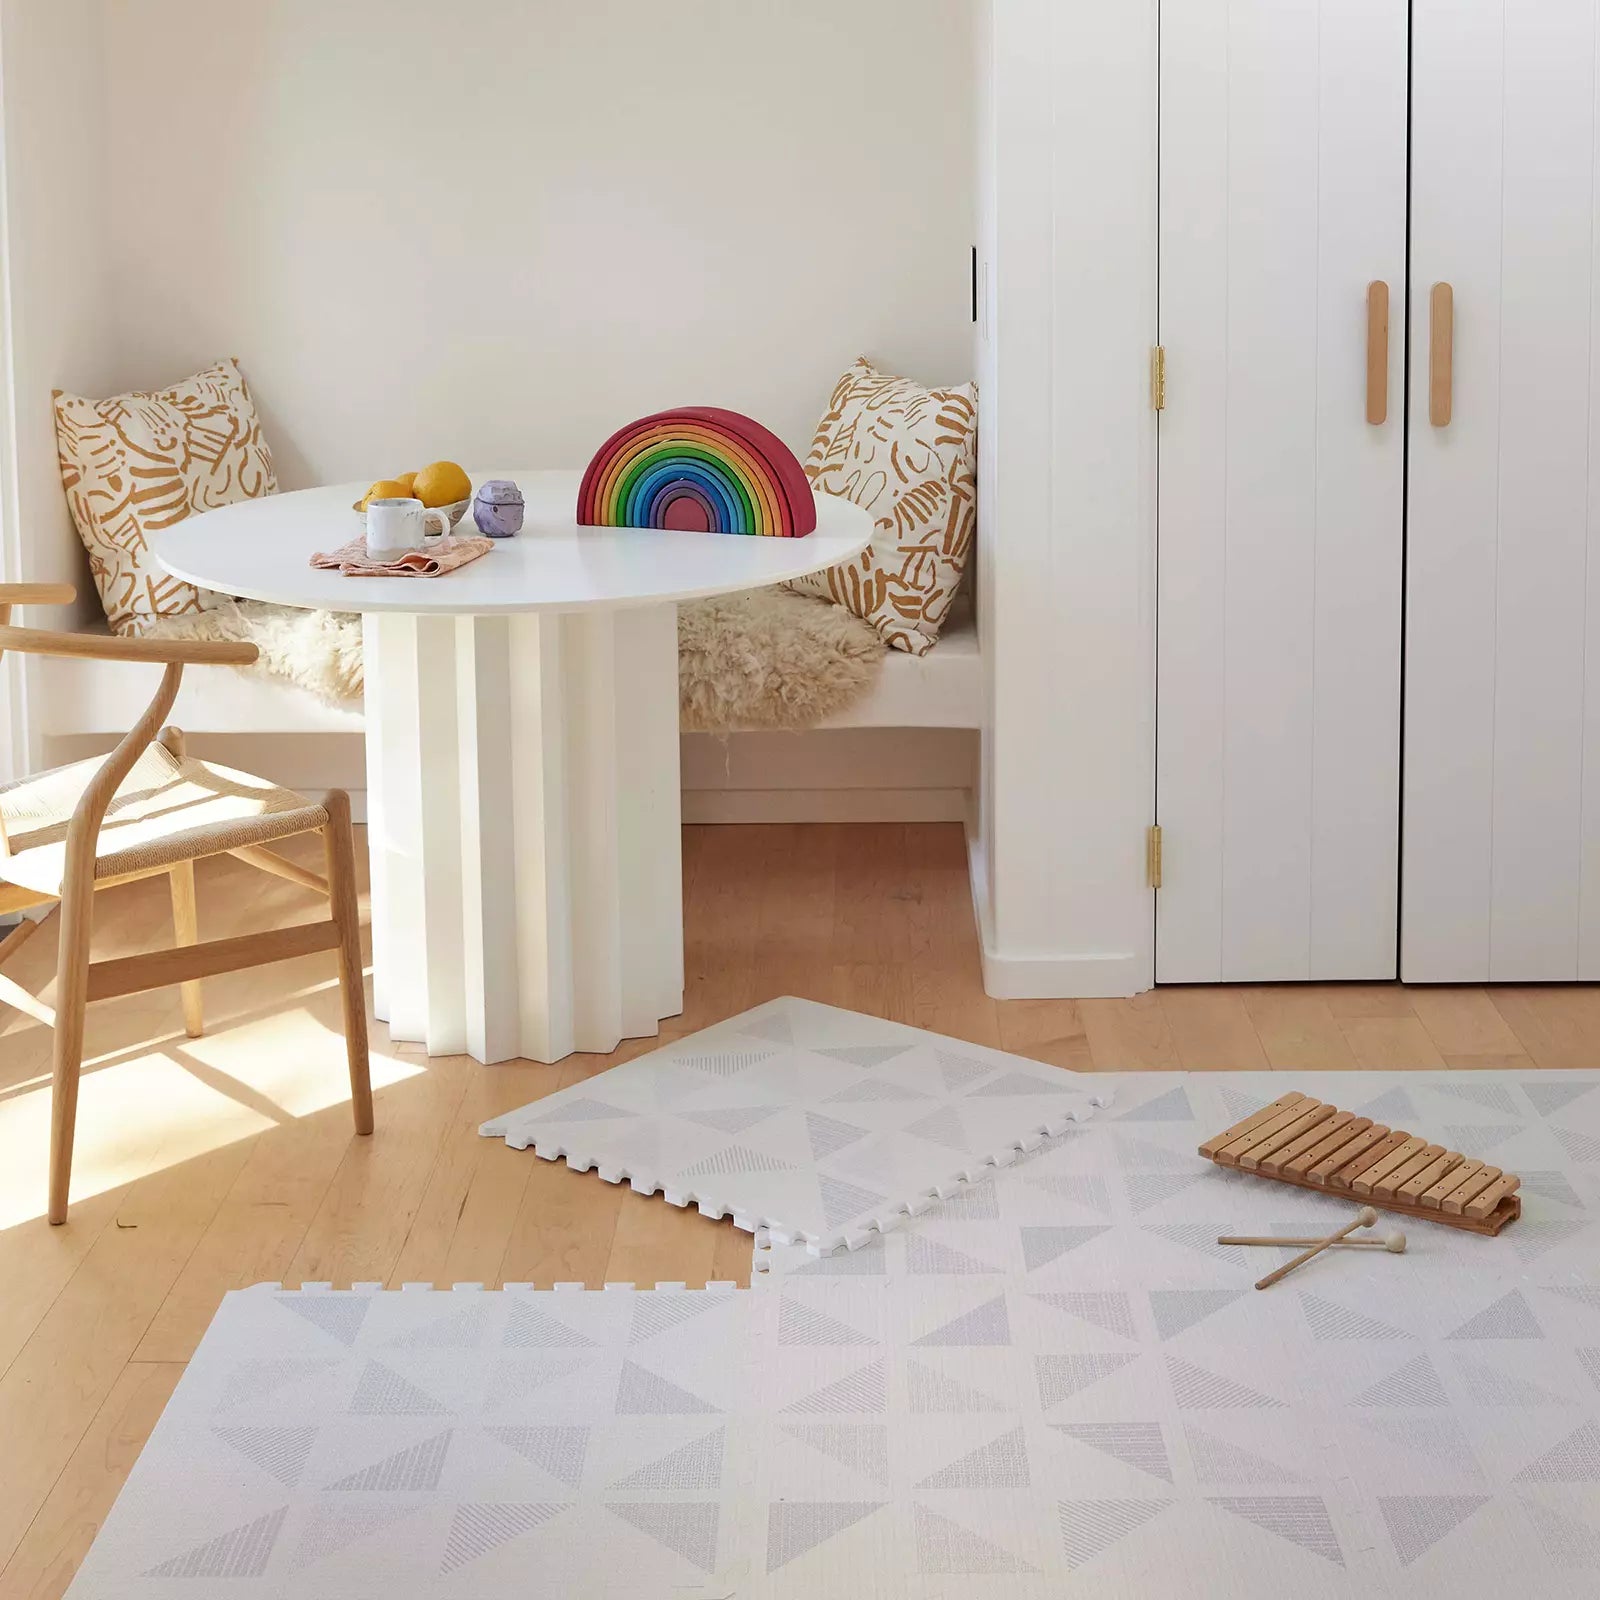 
Parenting With Style
Play Mats. Grown Up.
Unlike old-school fabric alternatives, zero laundering is required. They wipe clean with mild soap and dry in a snap. Plus, they connect seamlessly so you can reconfigure and redecorate at your whim. Other mats are just playing around.
